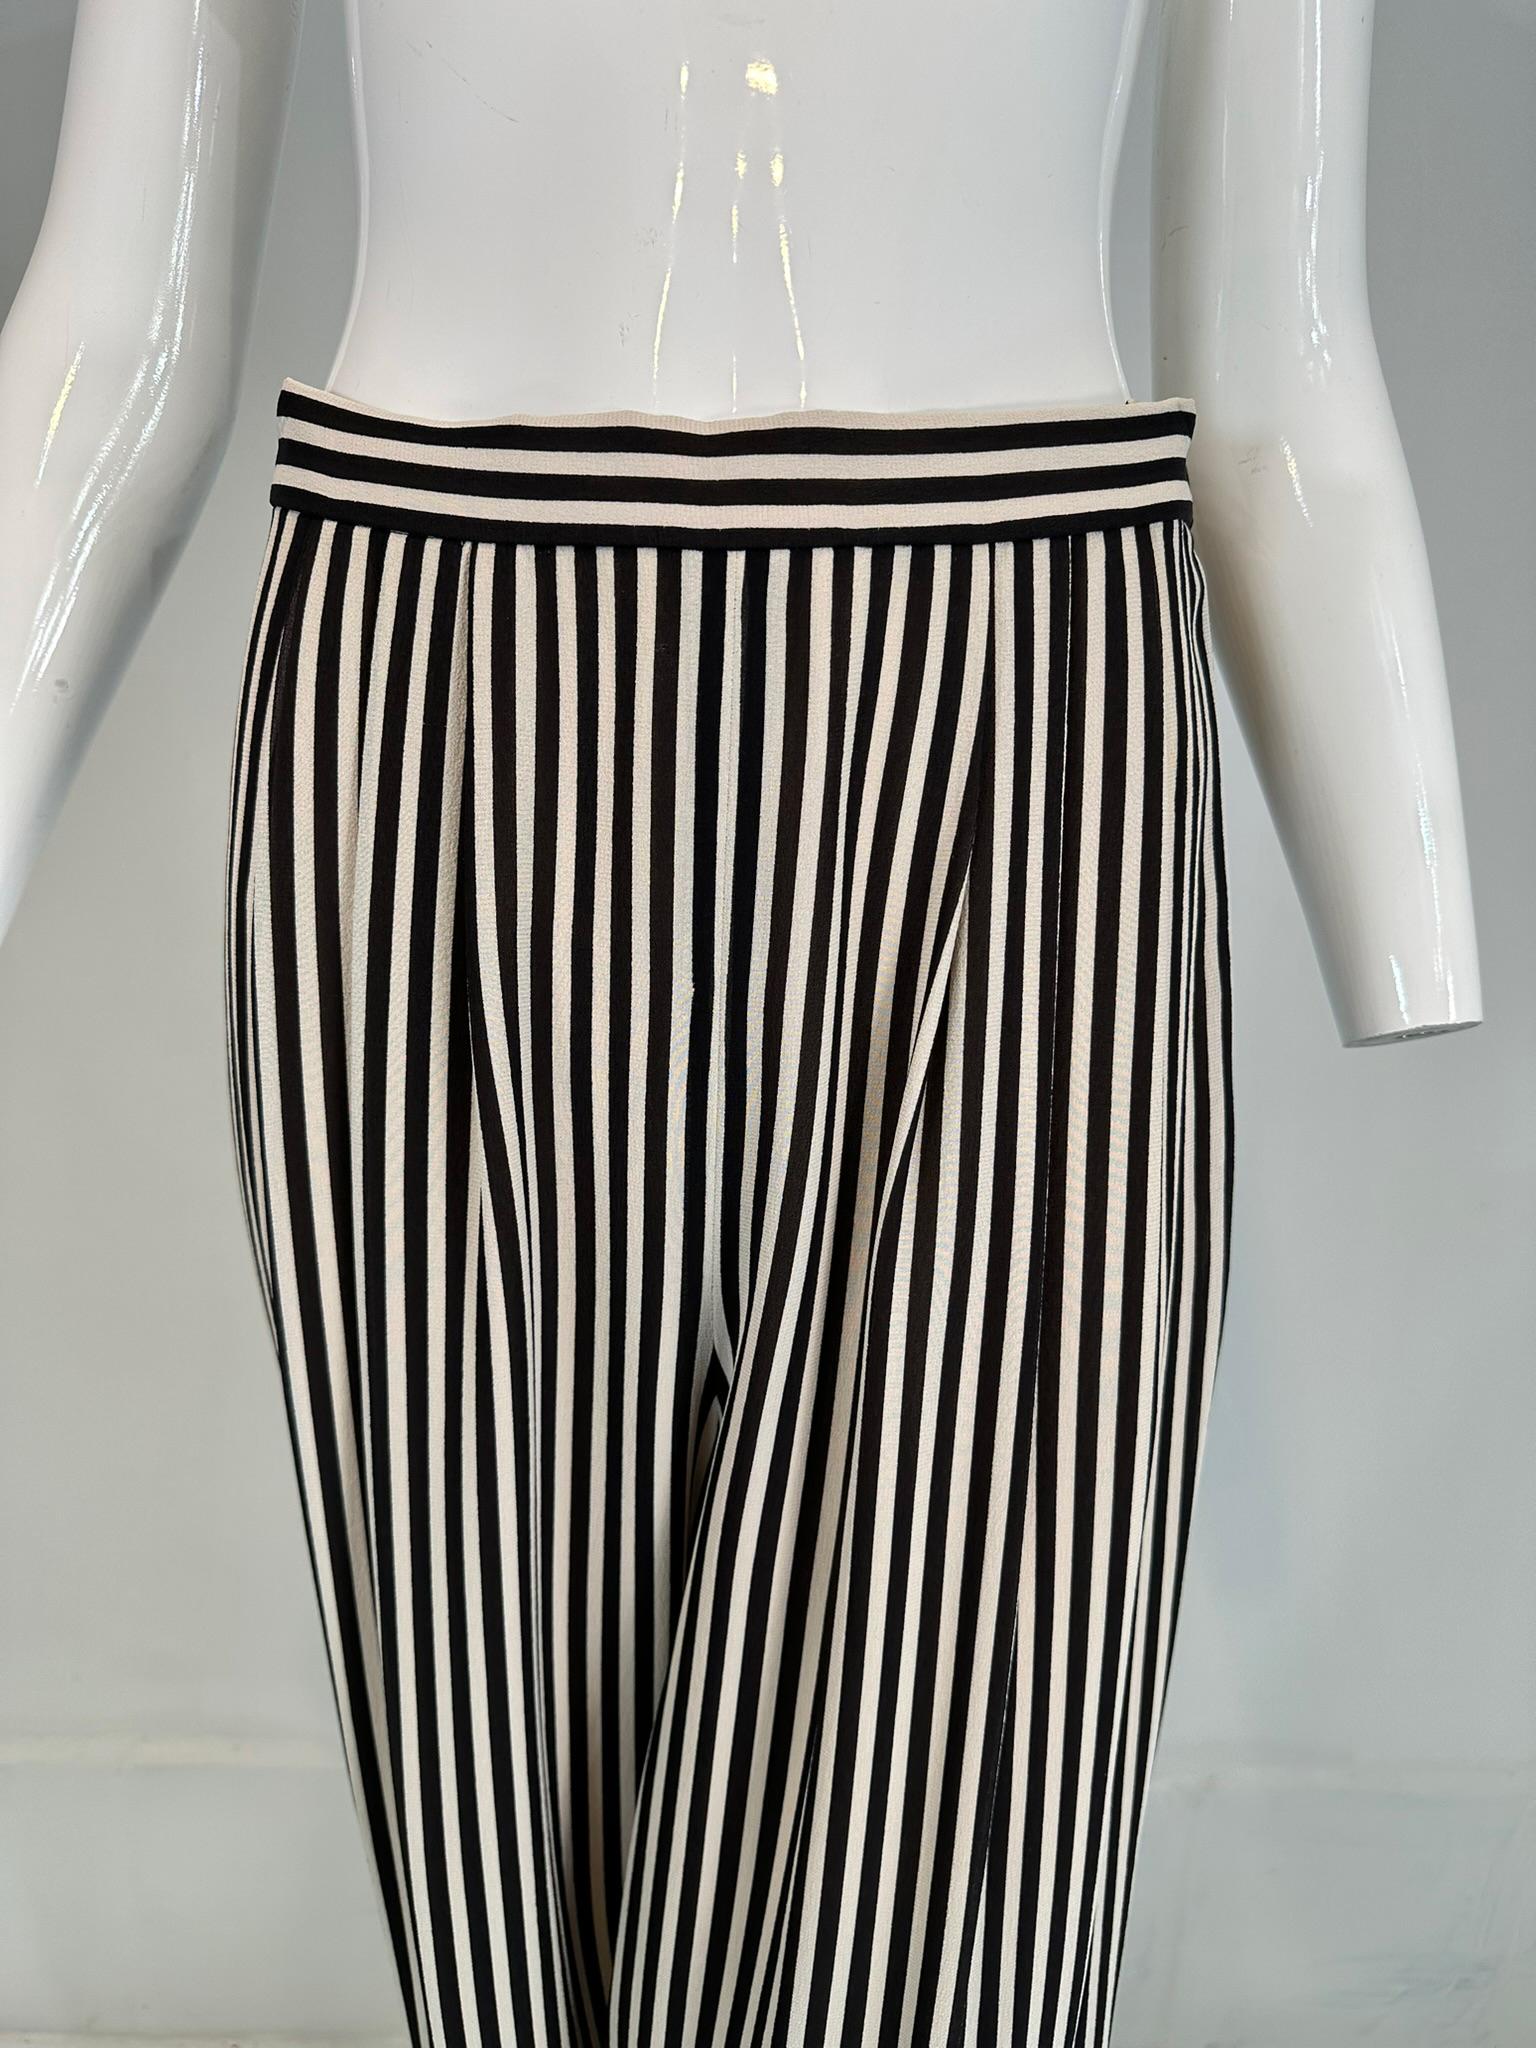 1990s Carlislie black & white silk stripe pleat front wide leg trouser. Wide flowey legs, hip front pleats at waist band. Narrow band waist, with side button closure & zipper below. Fully lined in lightweight nude silk crepe. These will be the